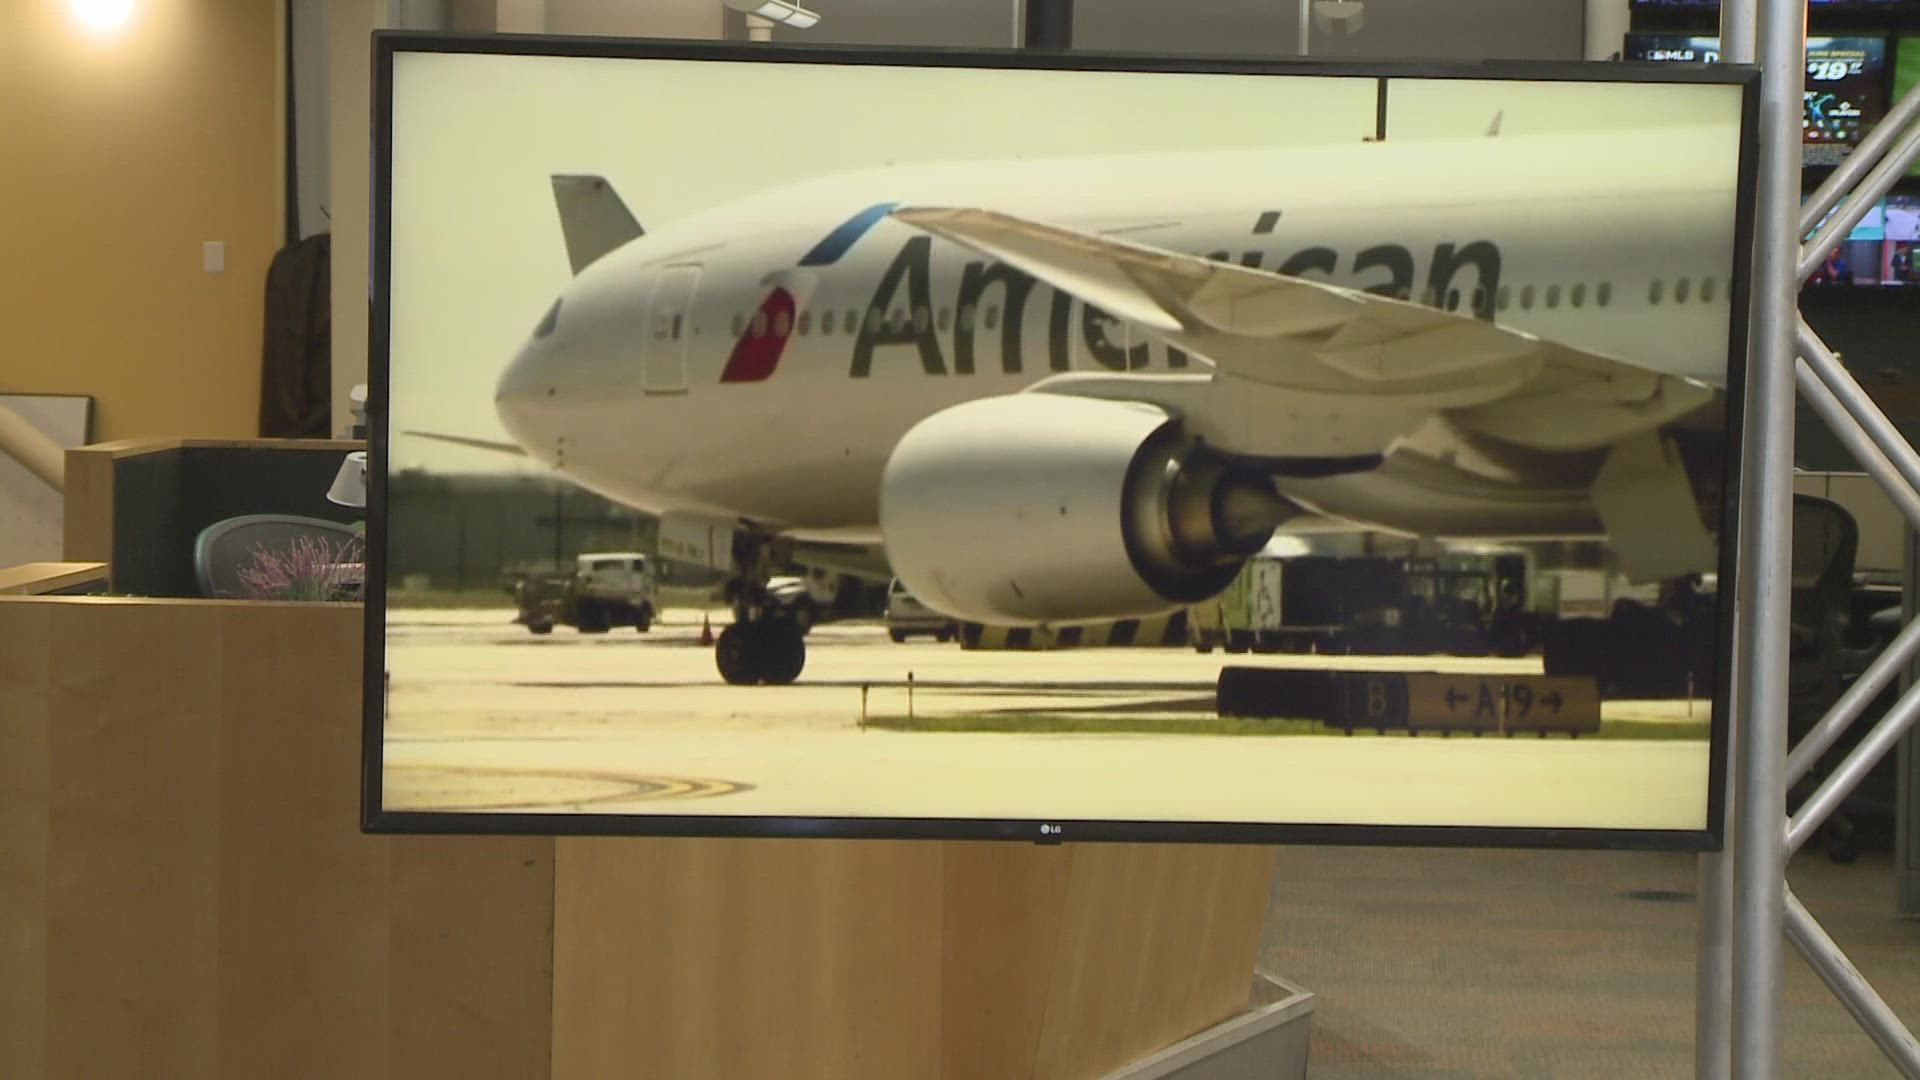 American Airlines flies from Toledo to Chicago twice daily. Service will end effective September 7.